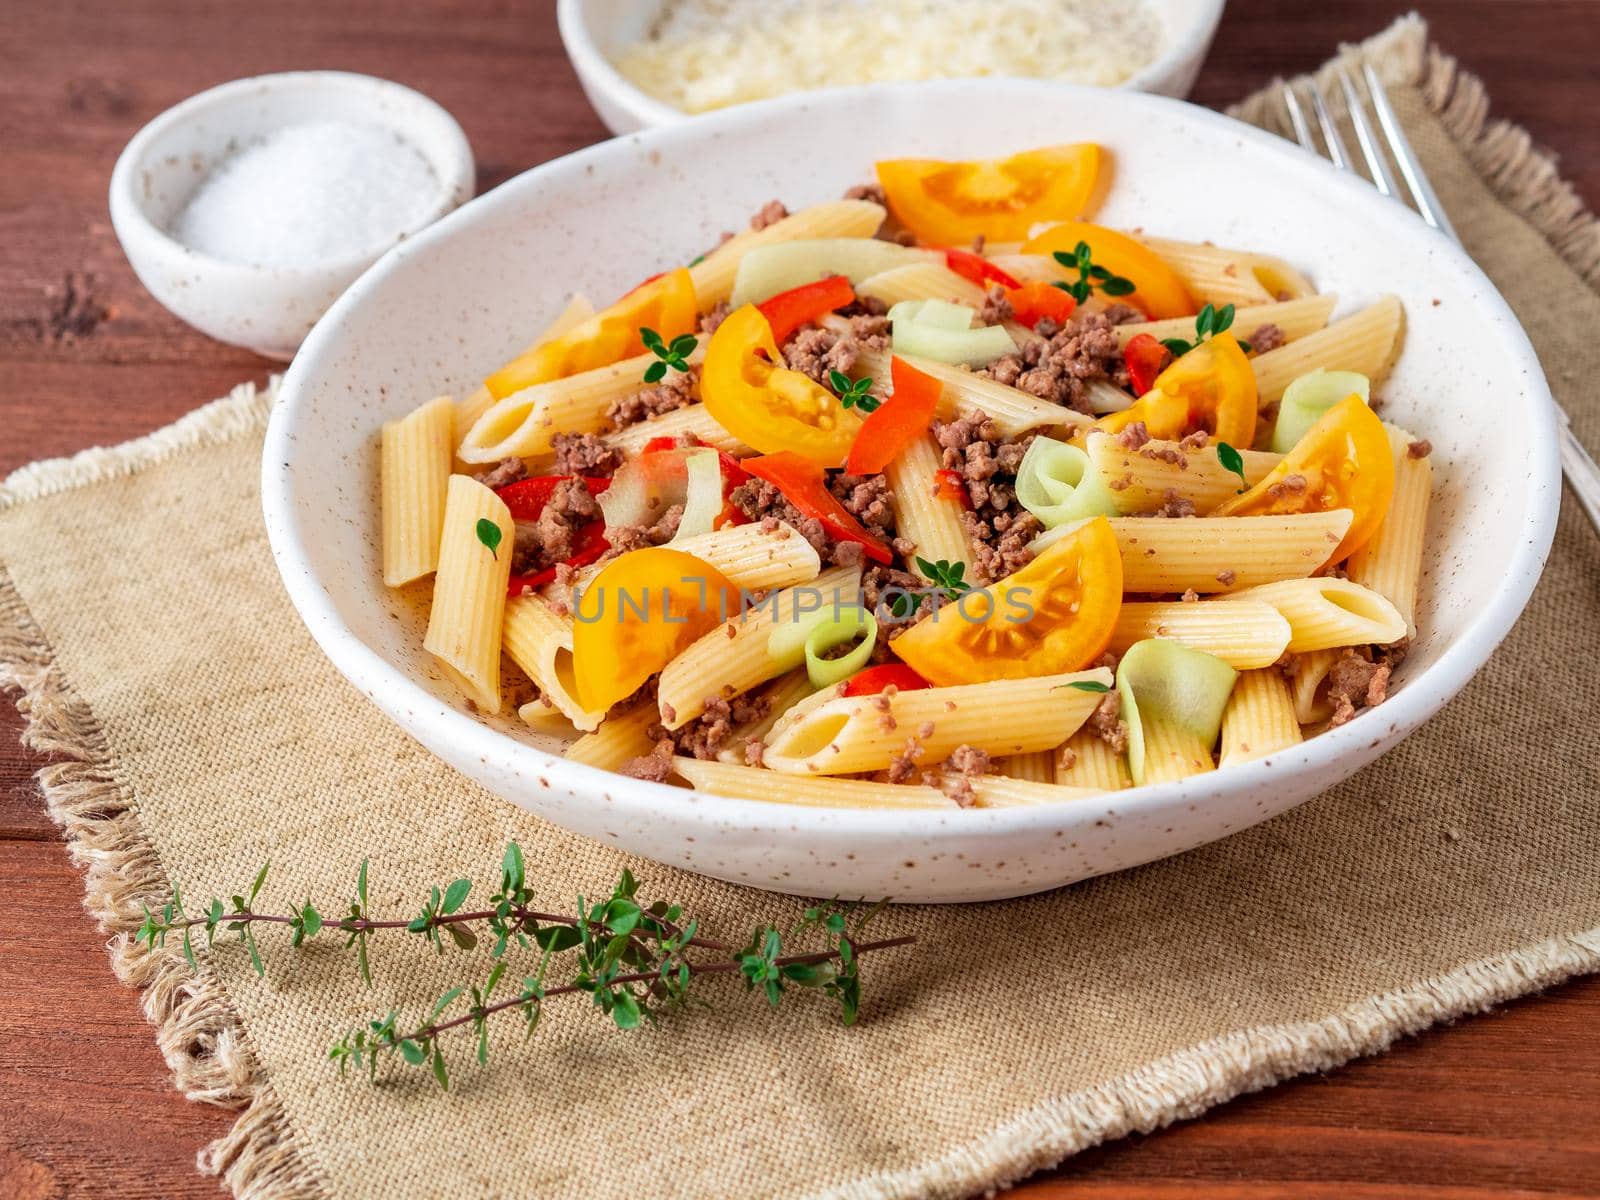 Penne pasta with yellow tomatoes, red and green vegetables, mincemeat on dark wooden background, side view by NataBene